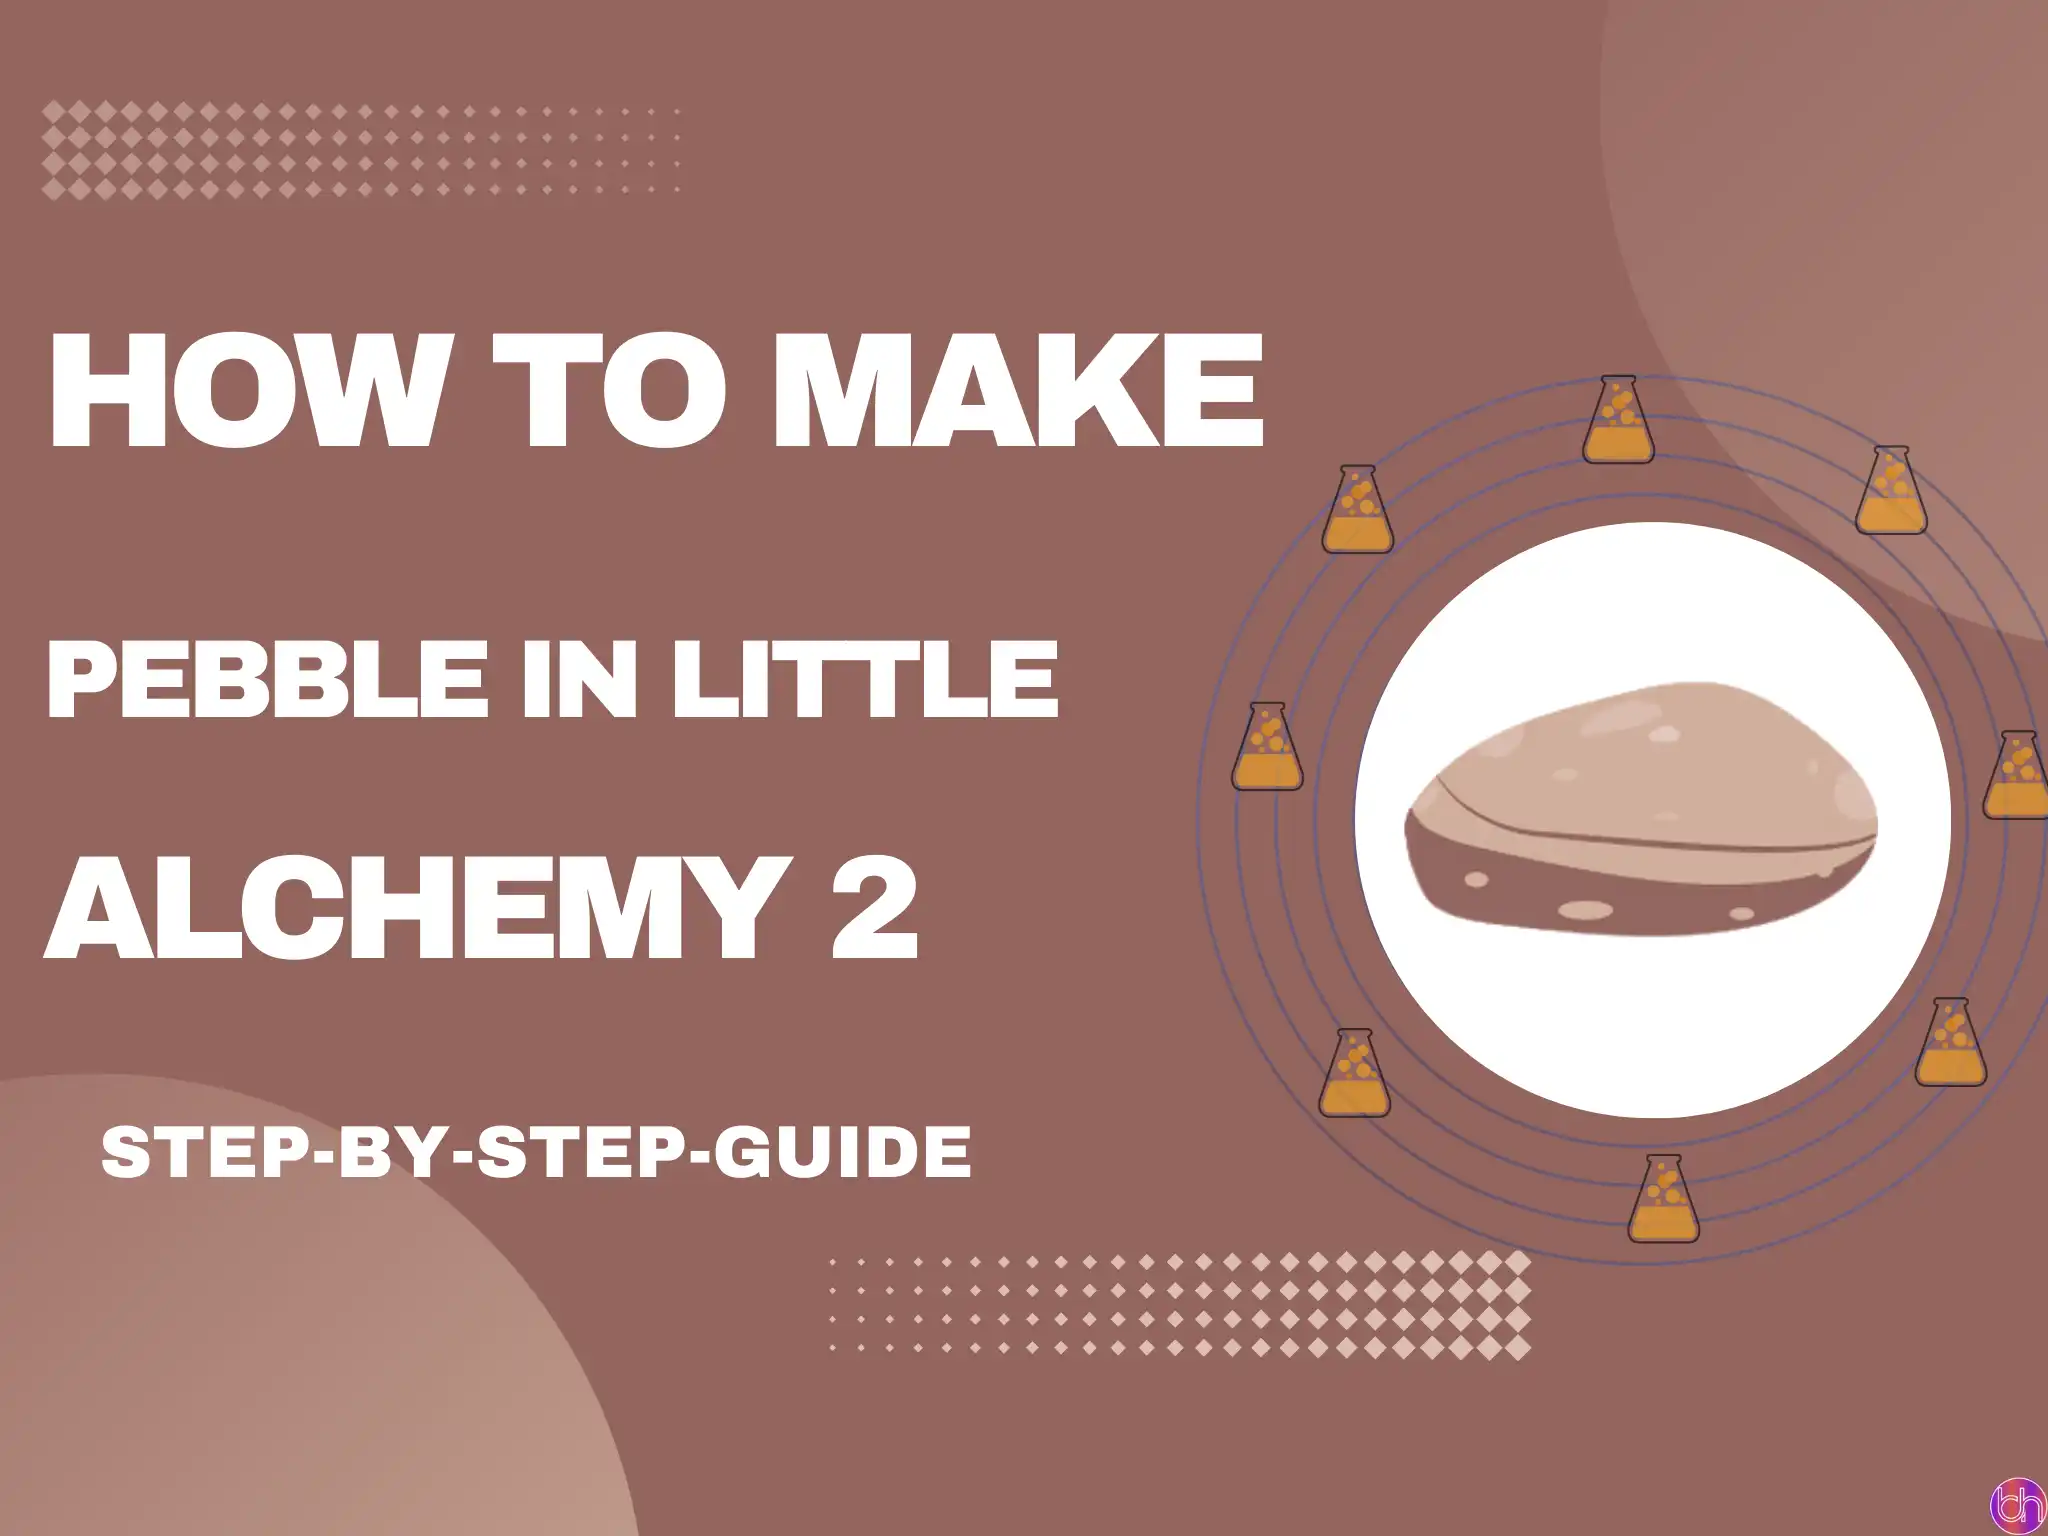 How to make Pebble in Little Alchemy 2